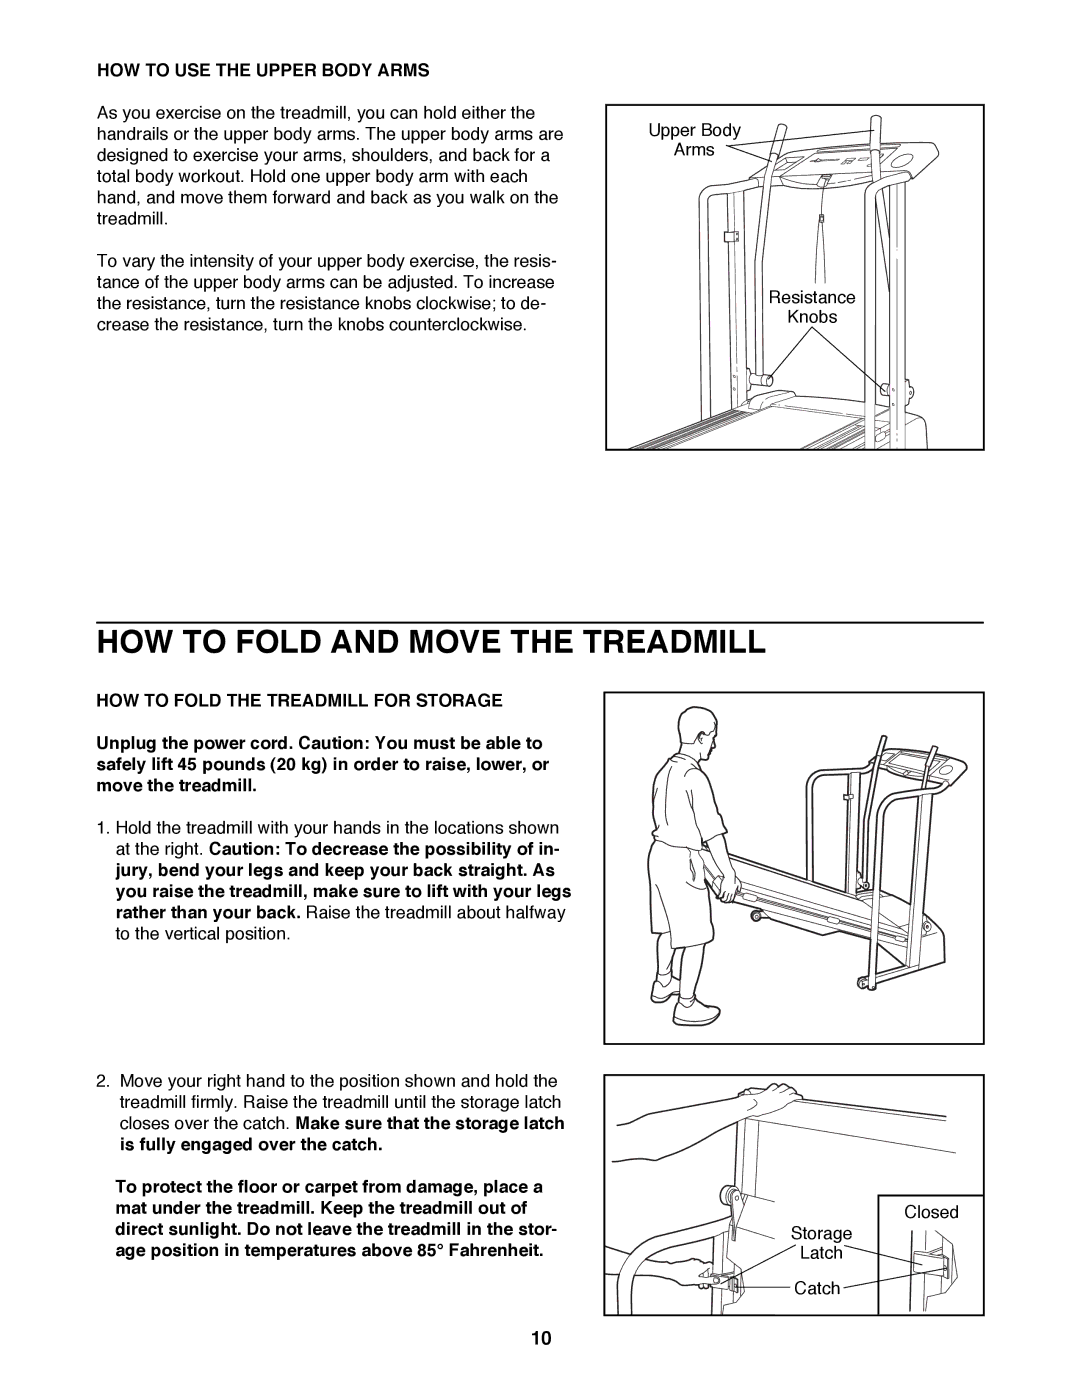 ProForm PFTL49400 user manual HOW to Fold and Move the Treadmill, HOW to USE the Upper Body Arms 